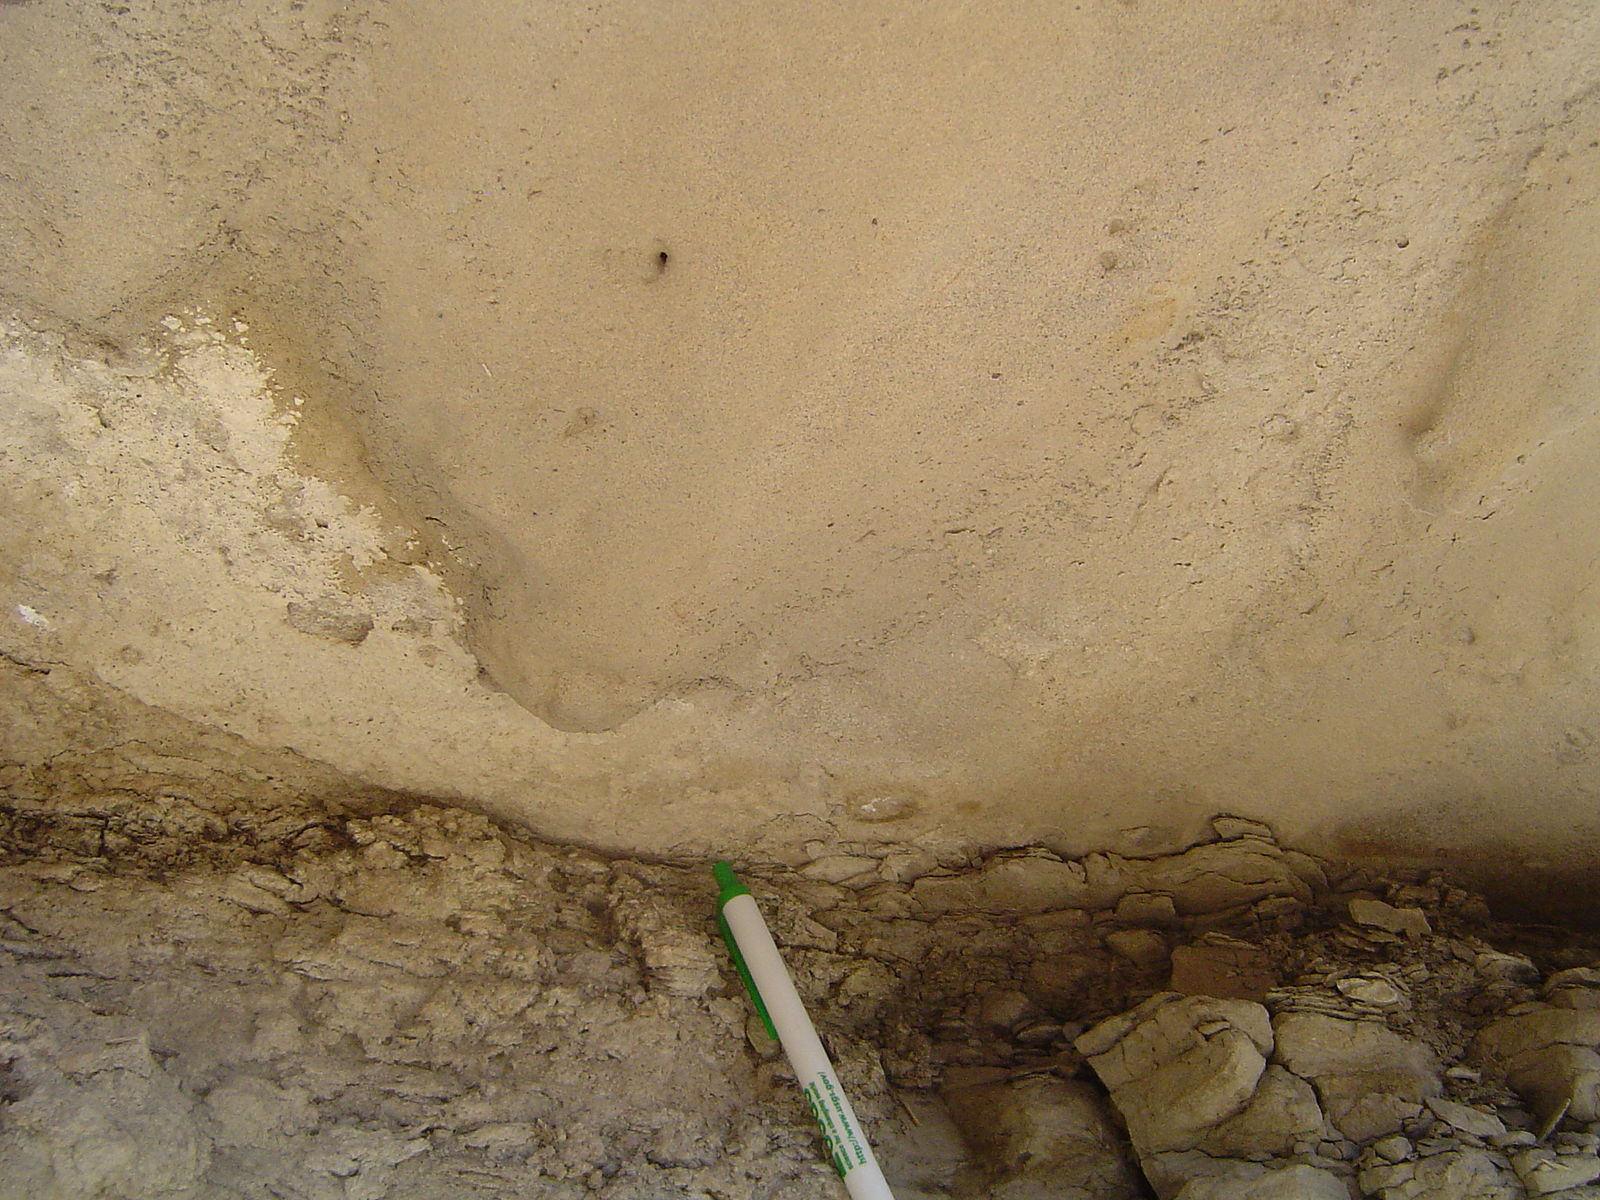 A view of the bottom of a tan rock layer with a bulge sticking out of the base toward the observer; a pen is next to the rock for scale.